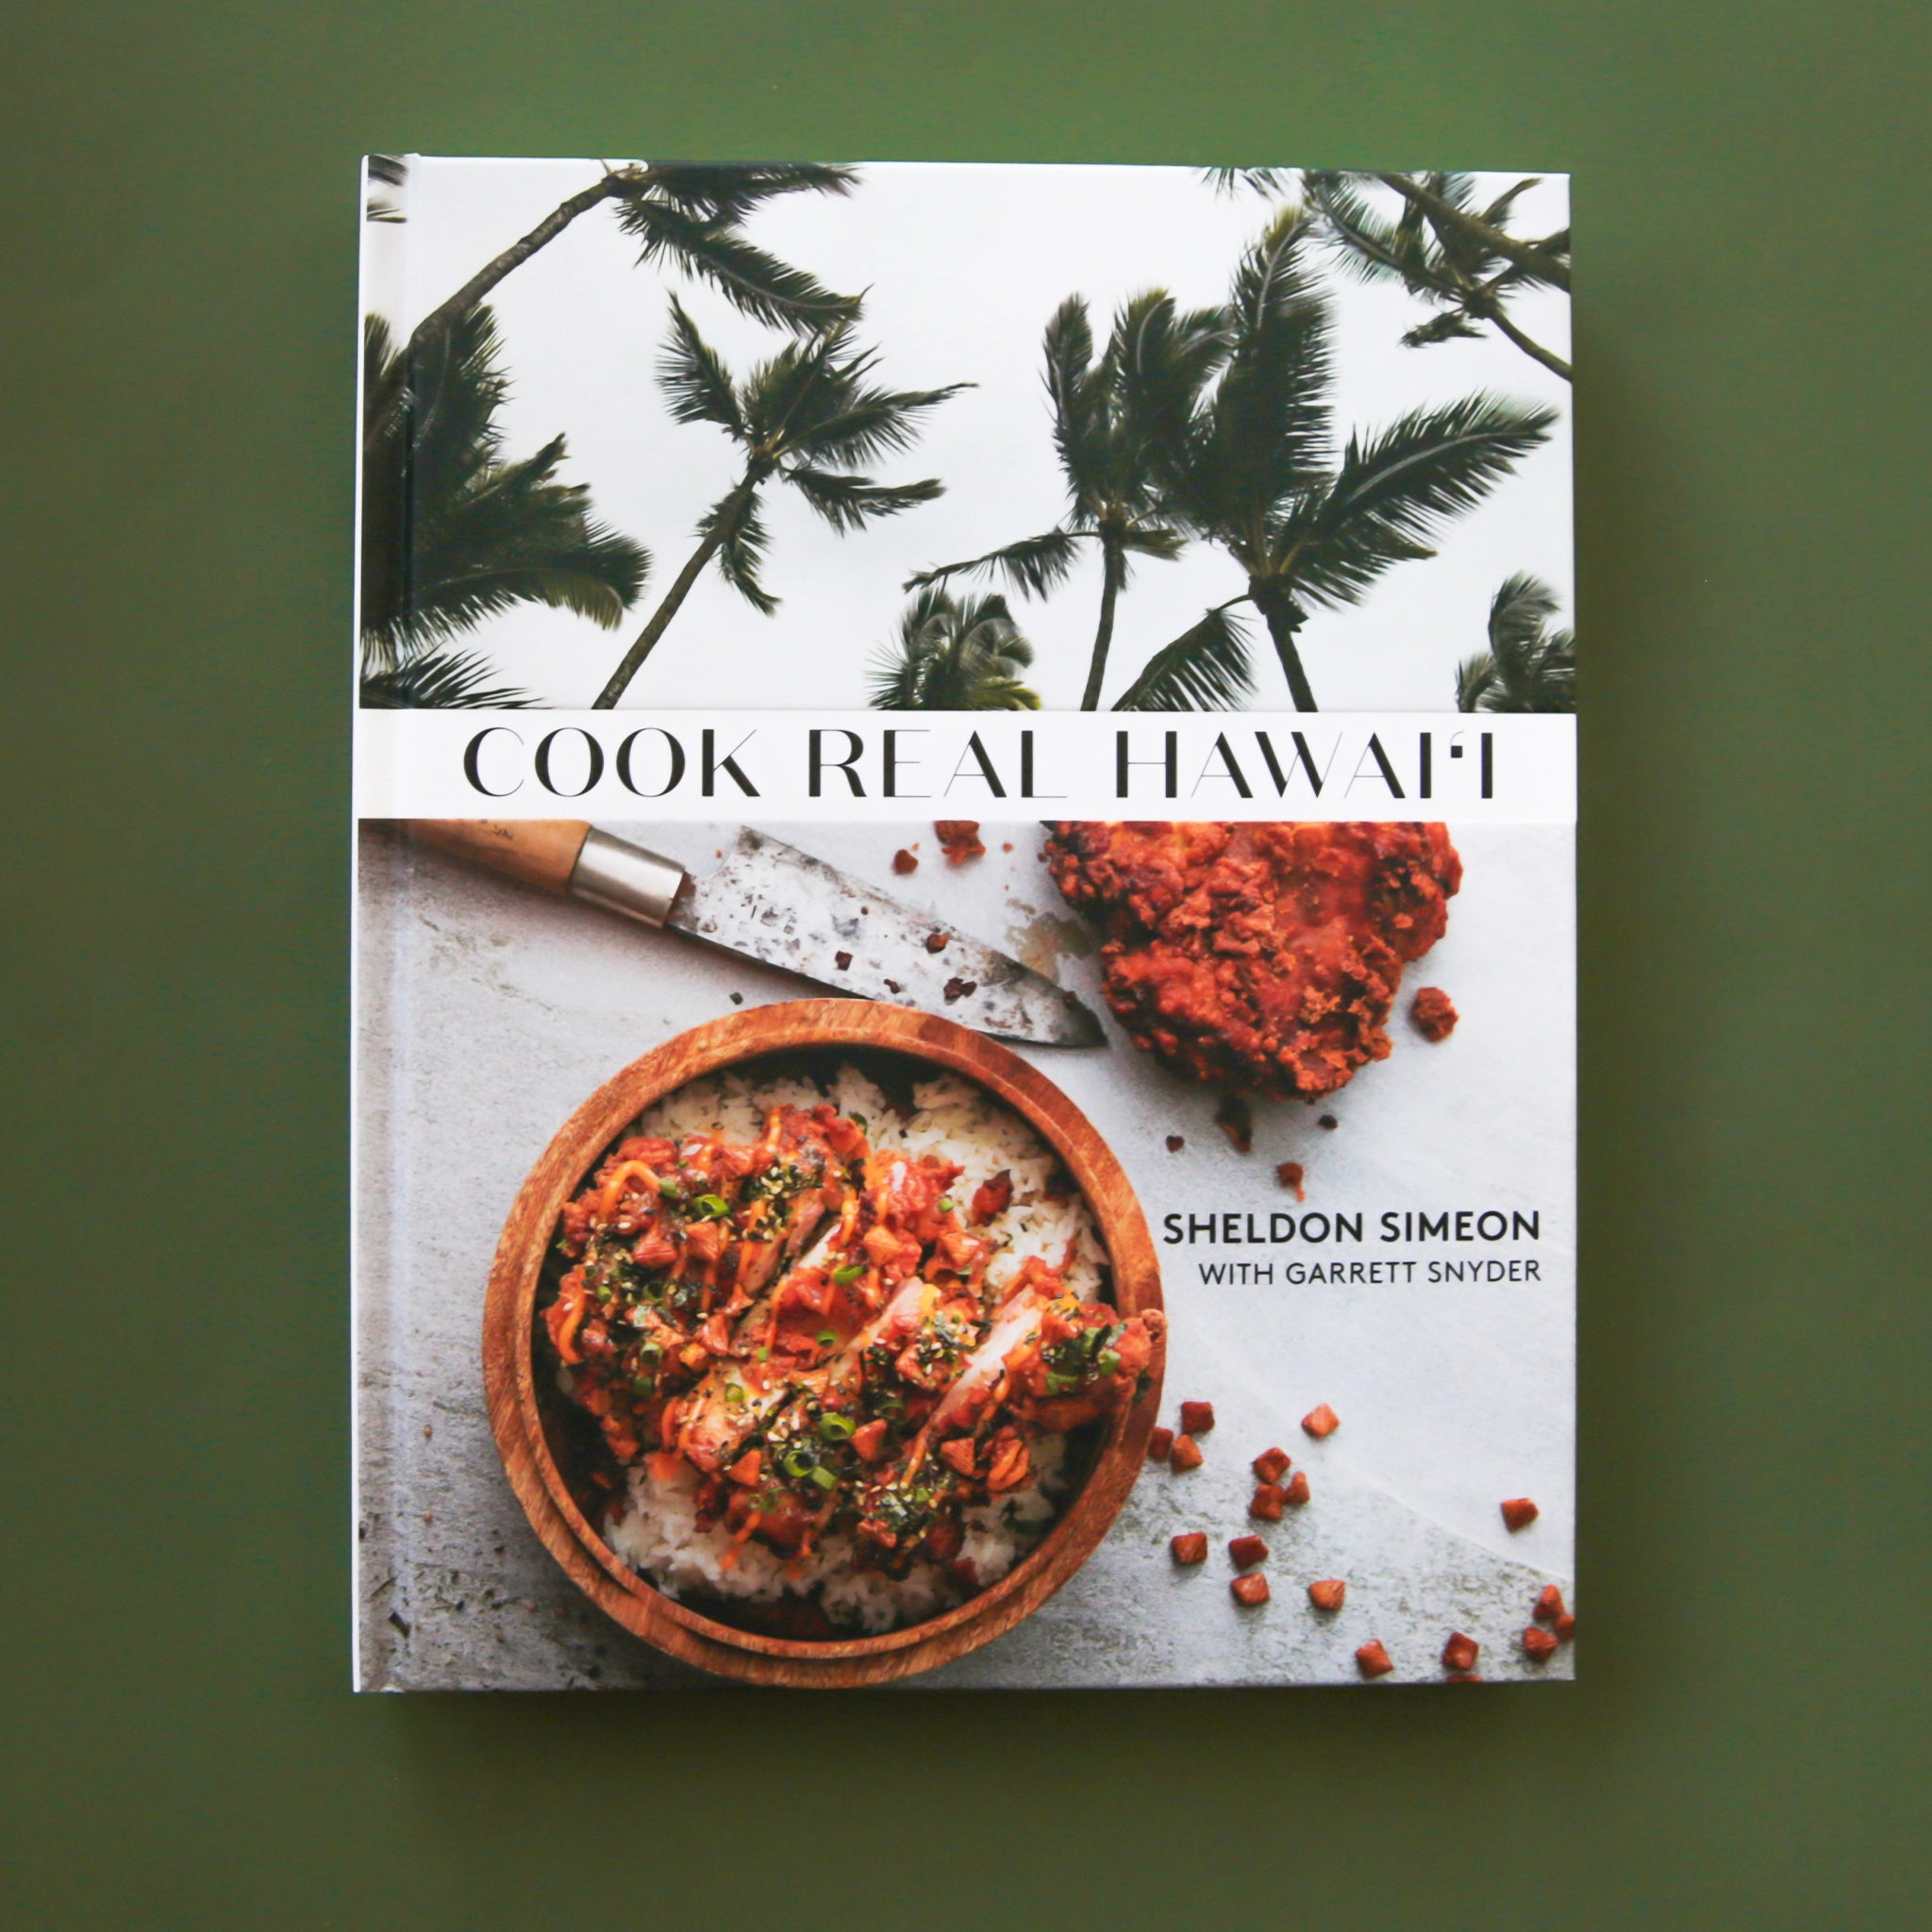 On a green background is a white book cover with palm trees and a vibrant meal in a bowl along with with text that reads, &quot;Cook Real Hawai&#39;i&quot;.